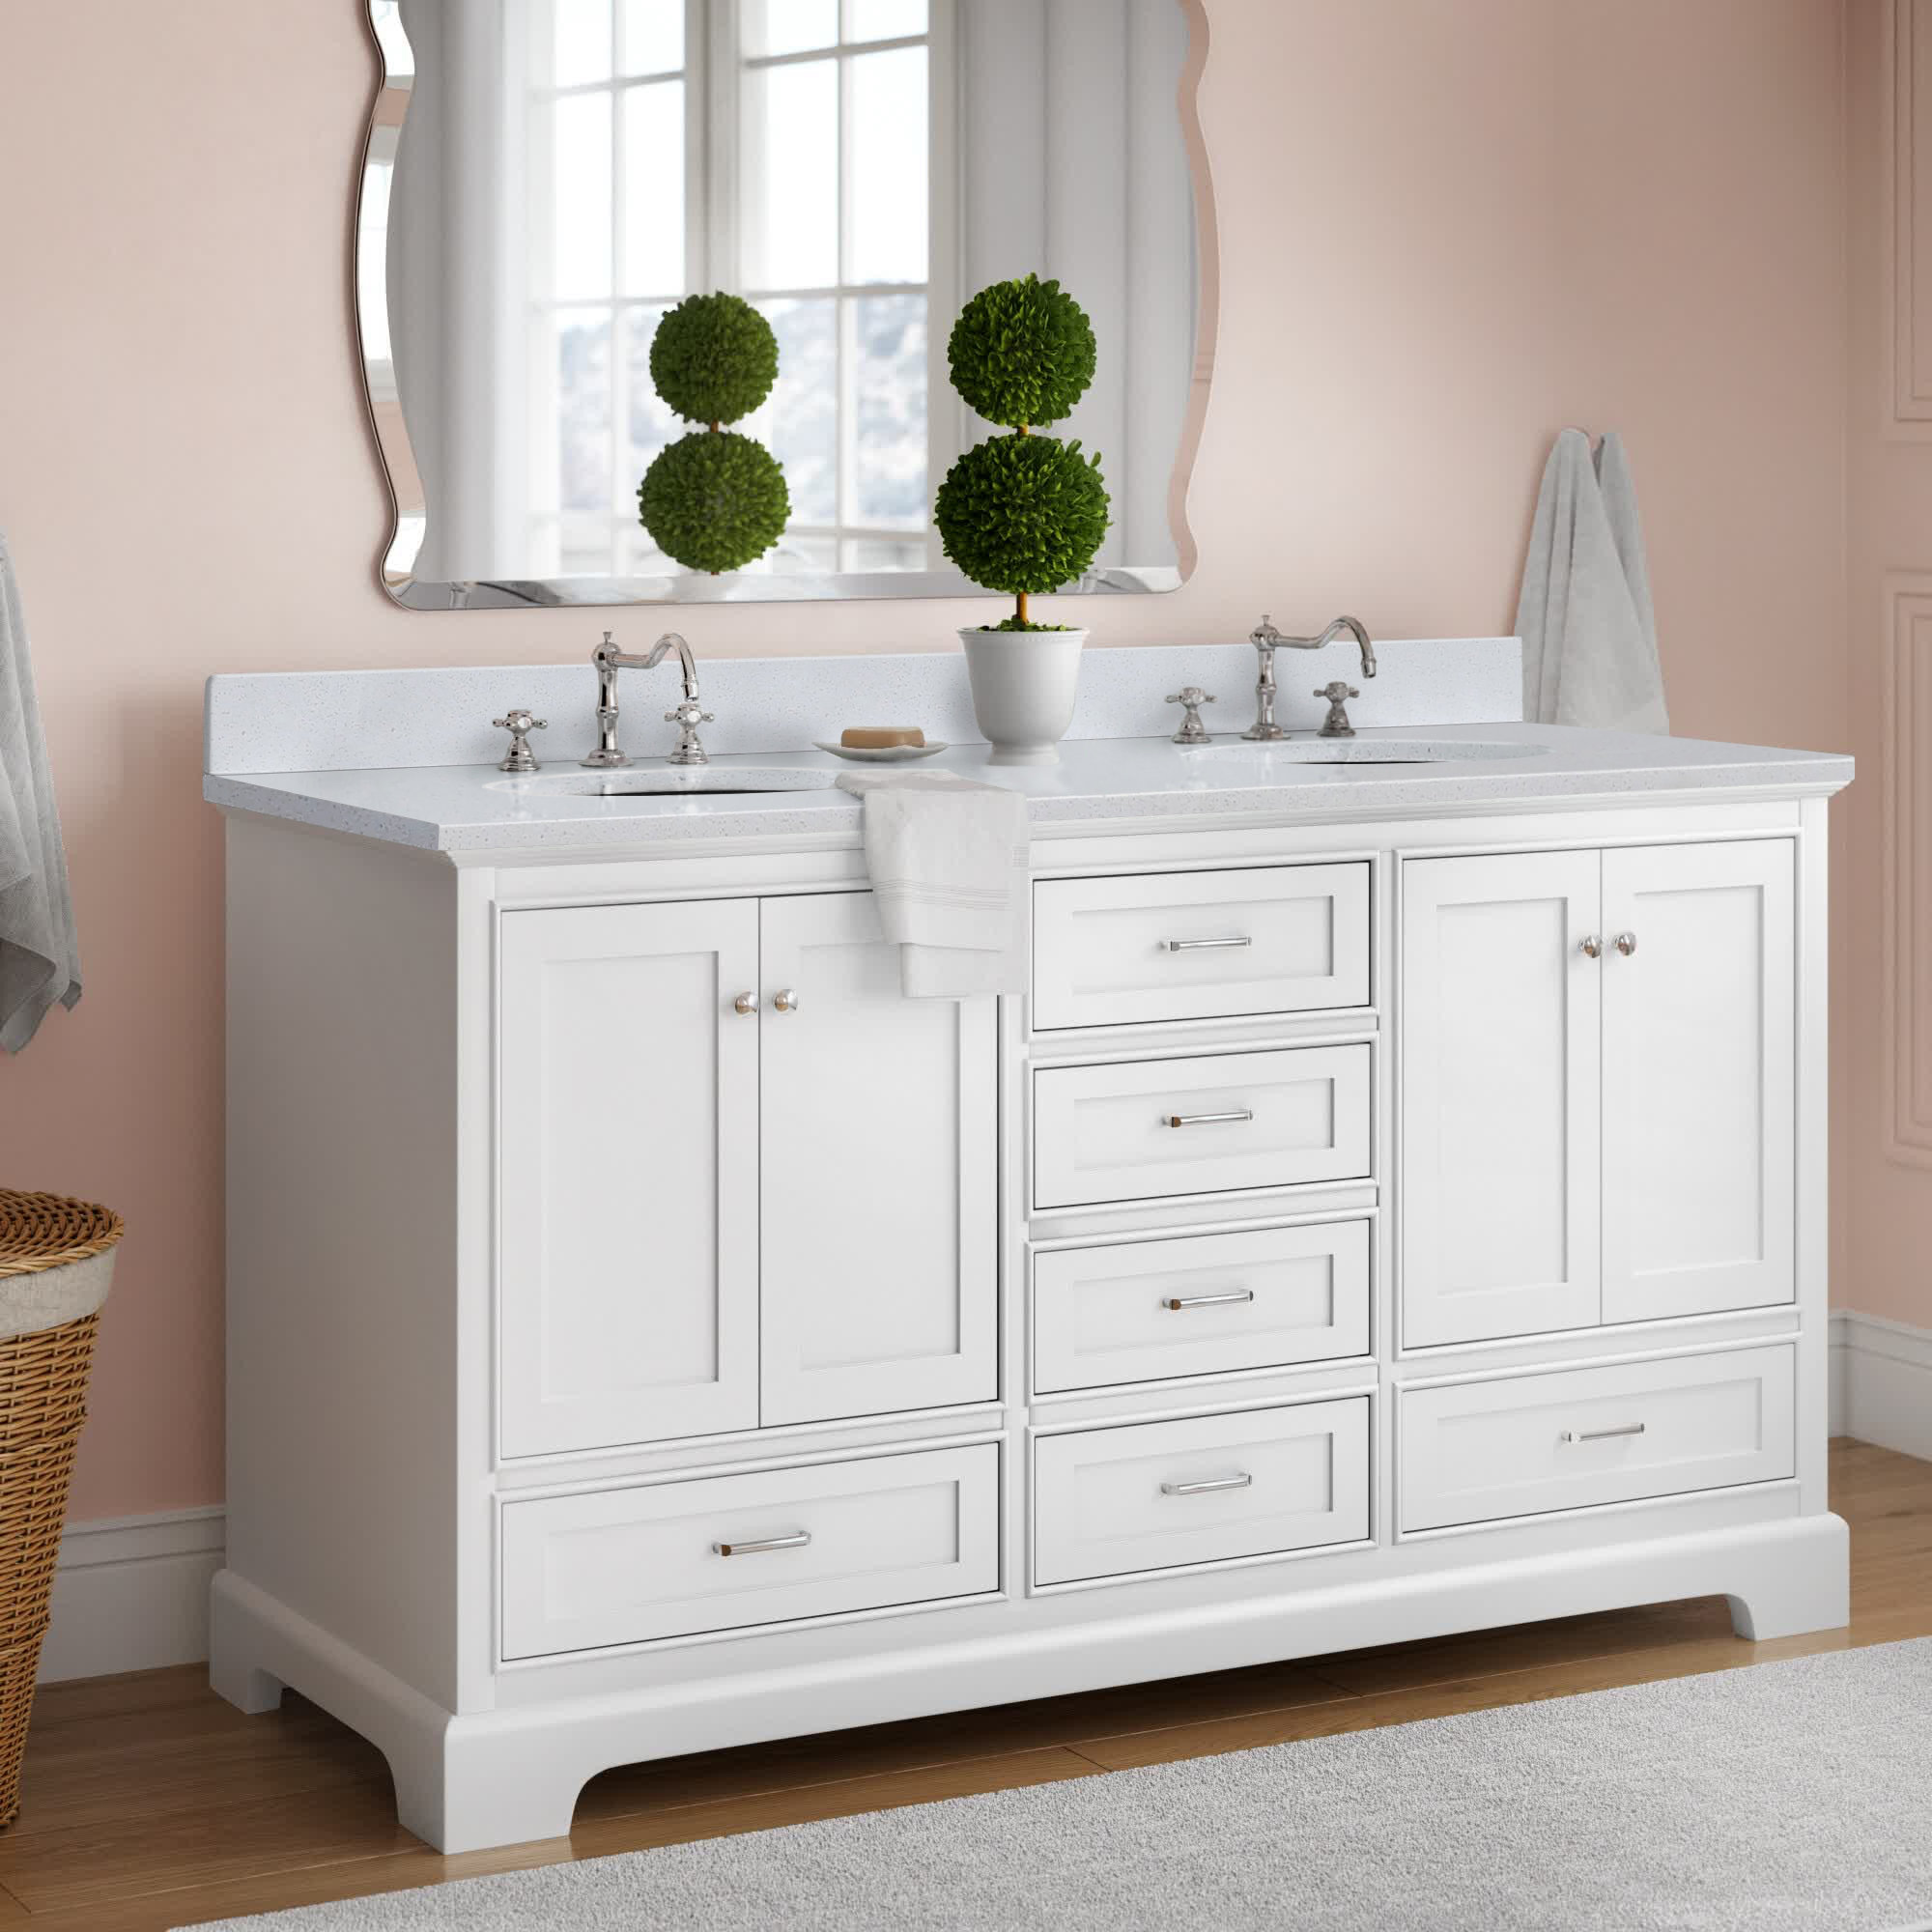 bathroom sink vanity clearance Clearance vanity / 60 inch vanity clearance — the new home design : 60